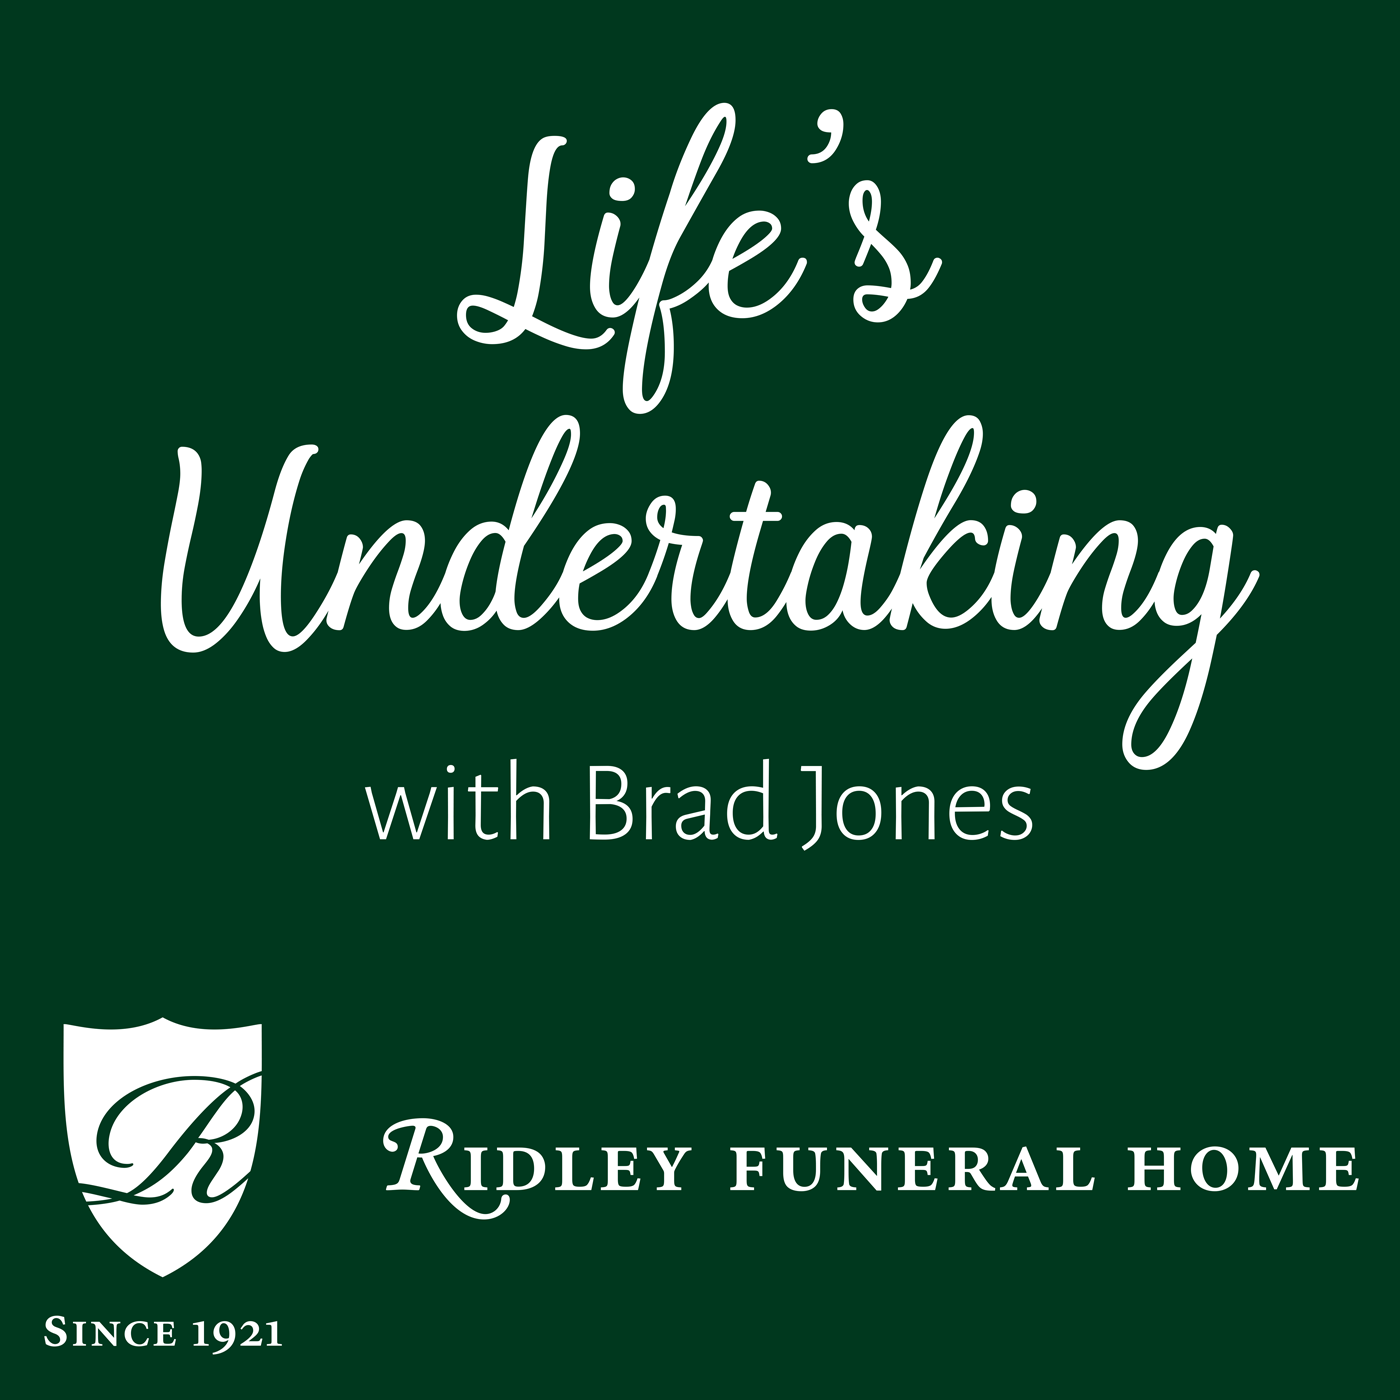 Life's Undertaking with Brad Jones from Ridley Funeral Home